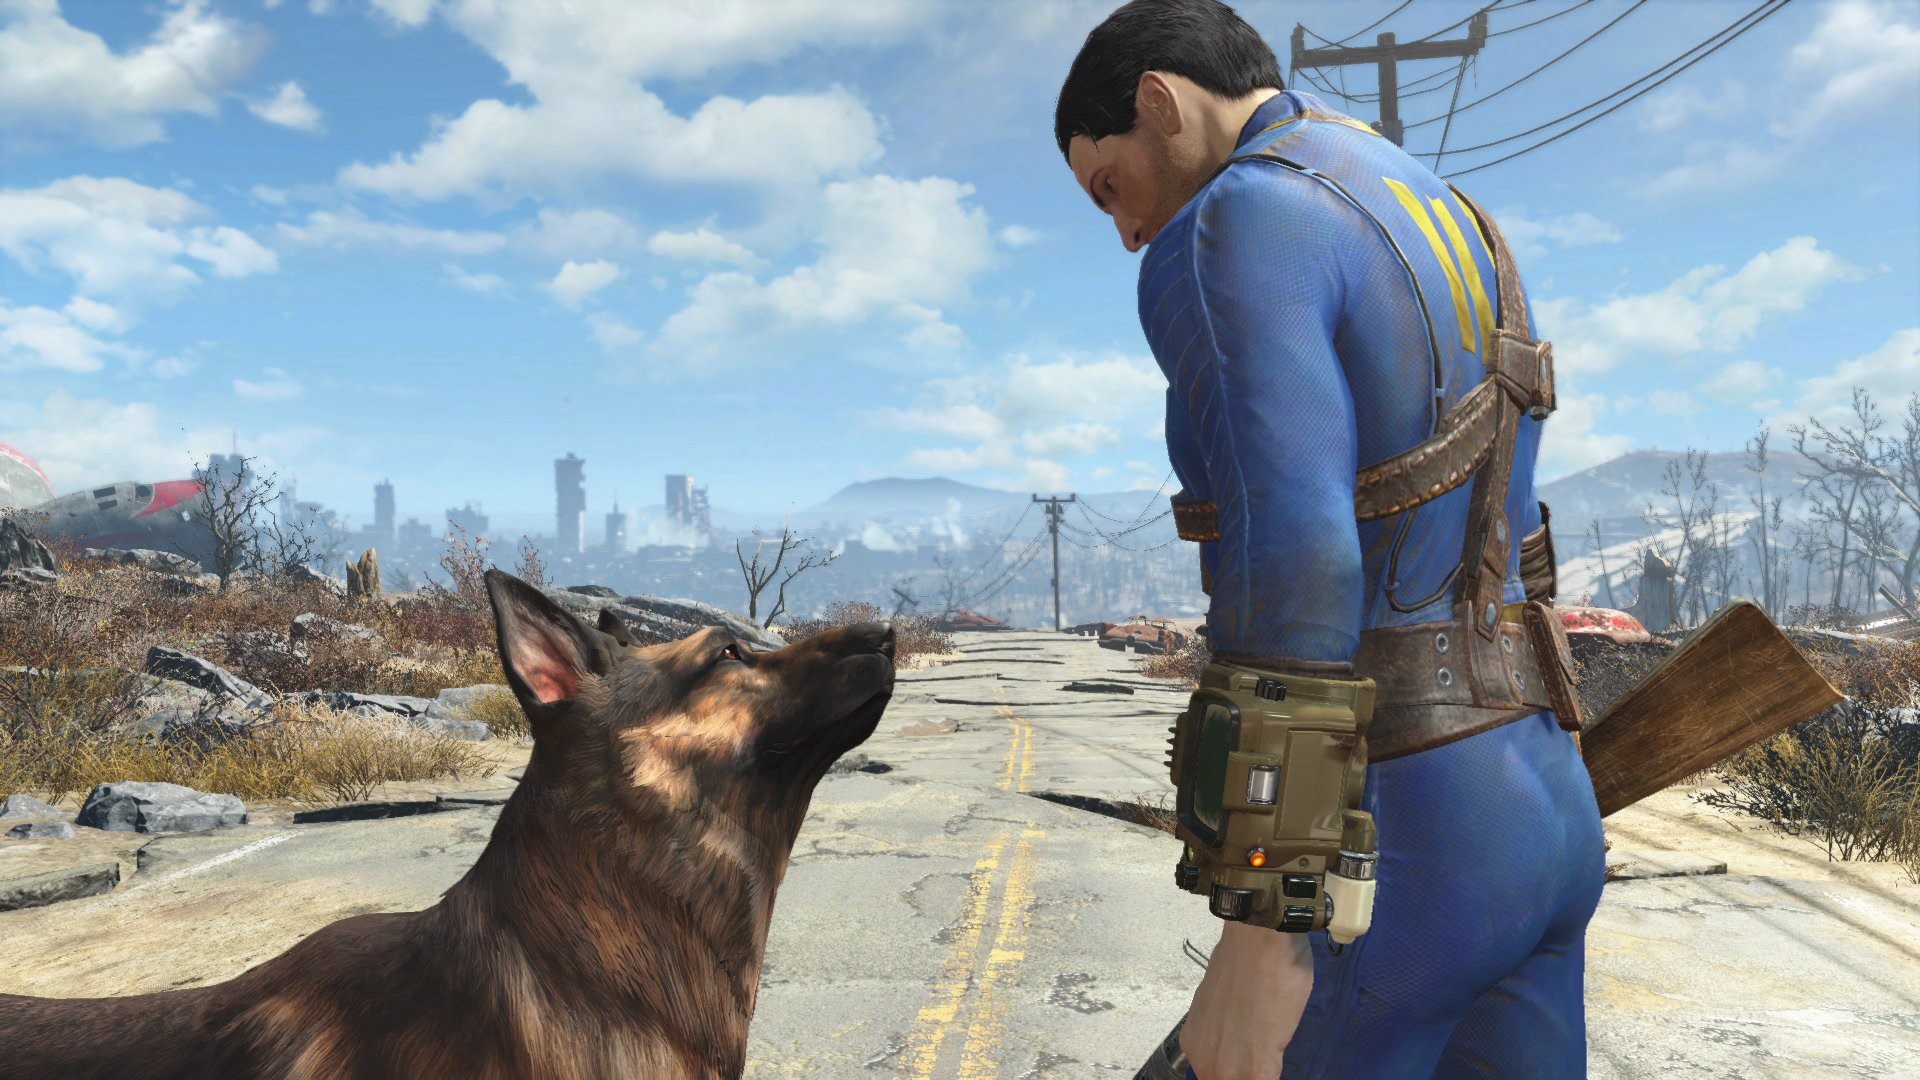 HD Wallpaper Background ID599182. Video Game Fallout 4